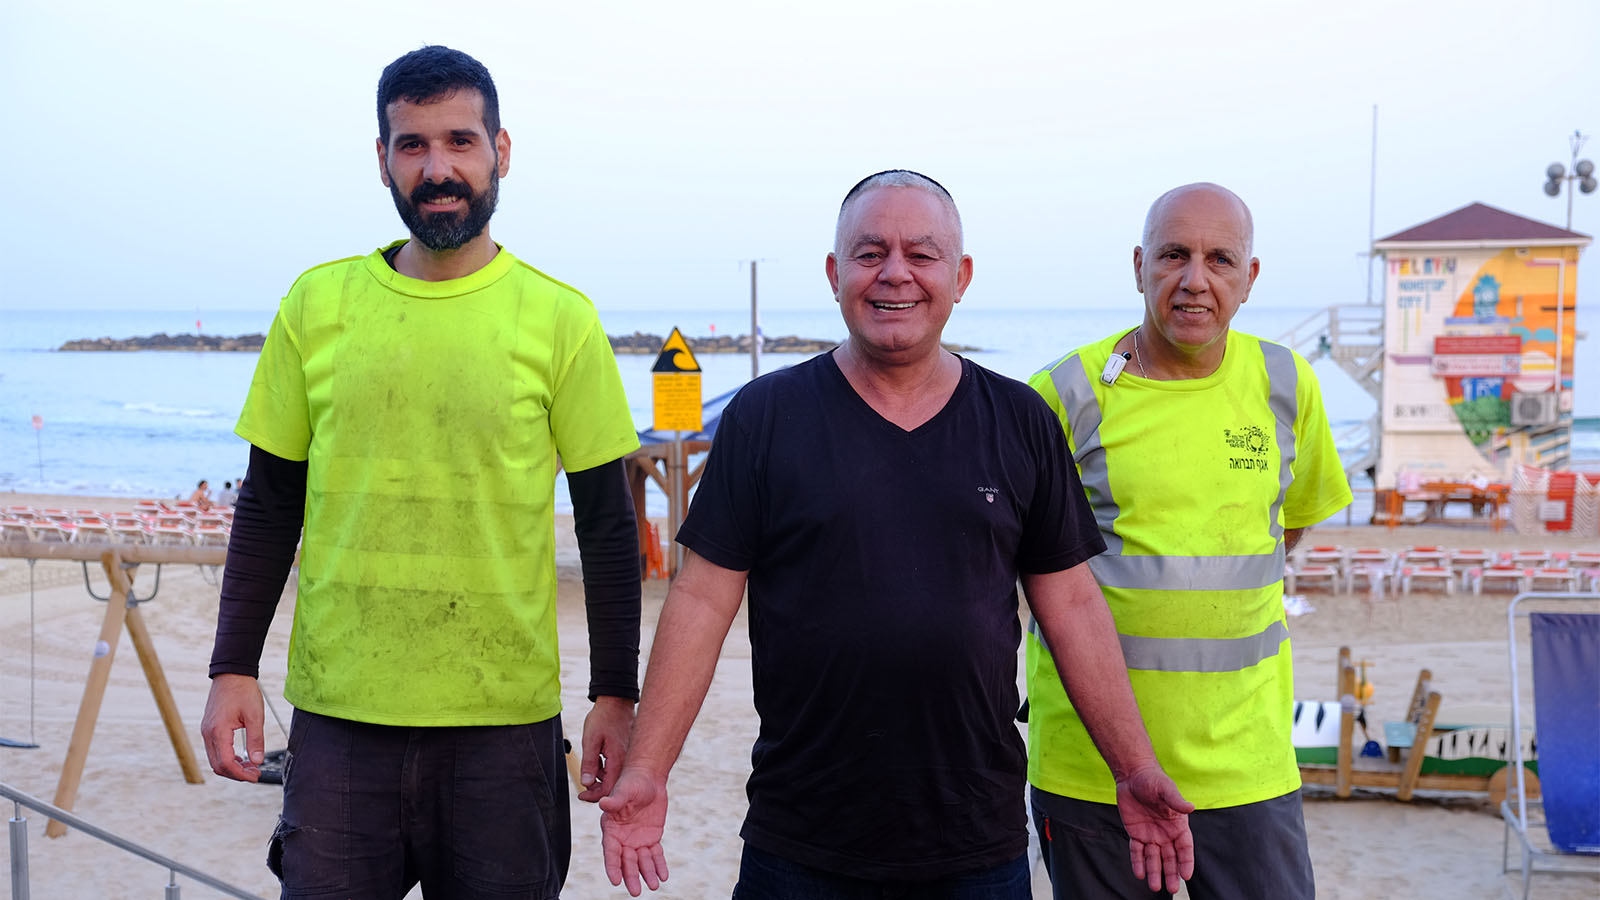 The trash collection truck team. From left: Roei Shalev, Amnon Sombol and Doron Barzelai. Credit: David Twersky